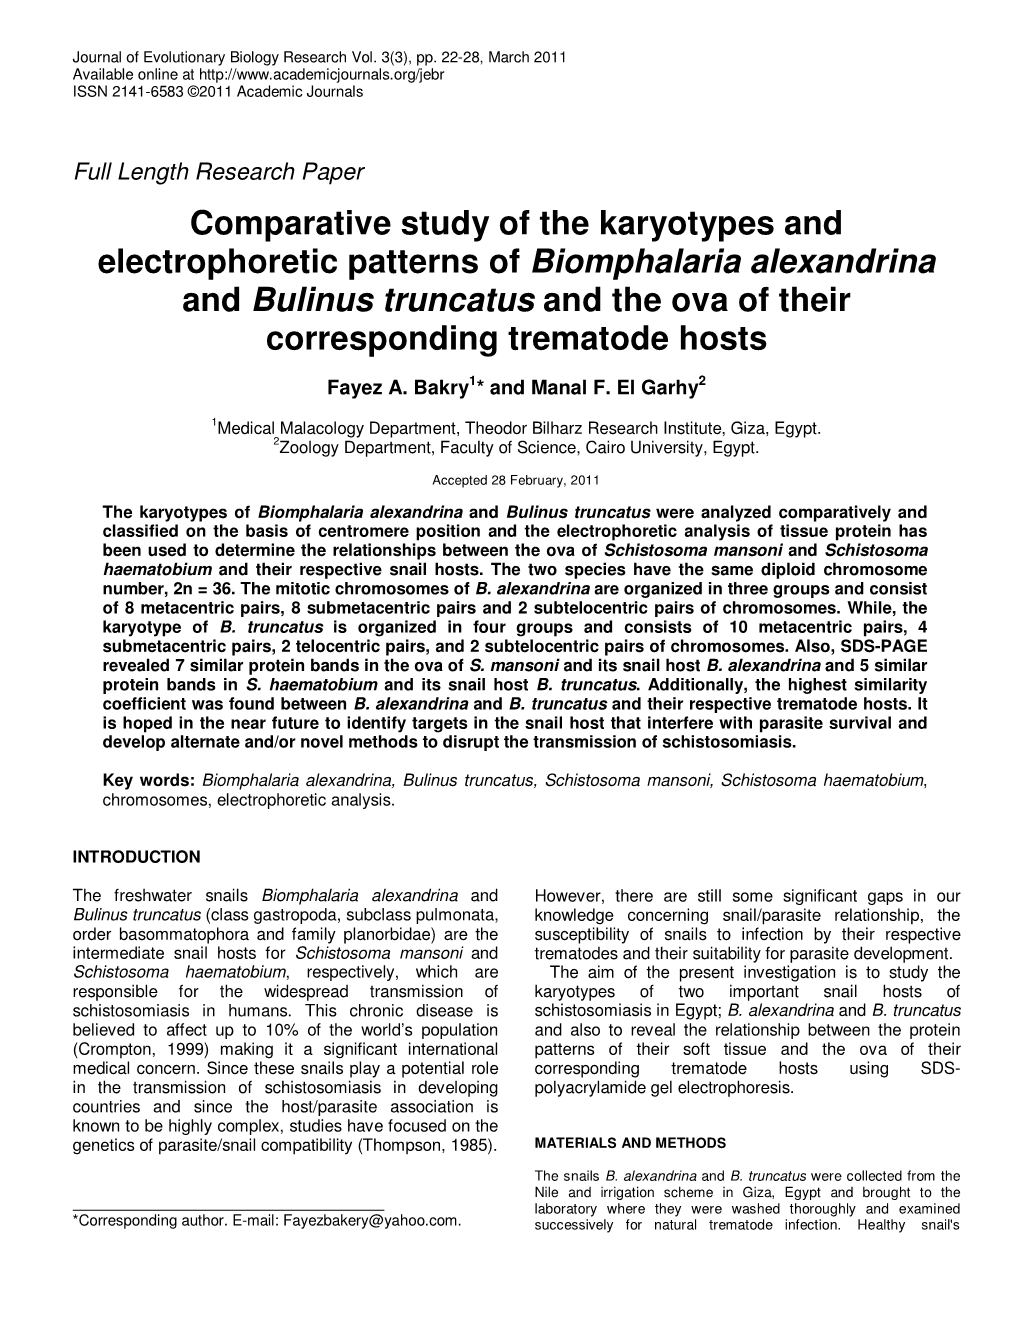 Comparative Study of the Karyotypes and Electrophoretic Patterns of Biomphalaria Alexandrina and Bulinus Truncatus and the Ova of Their Corresponding Trematode Hosts